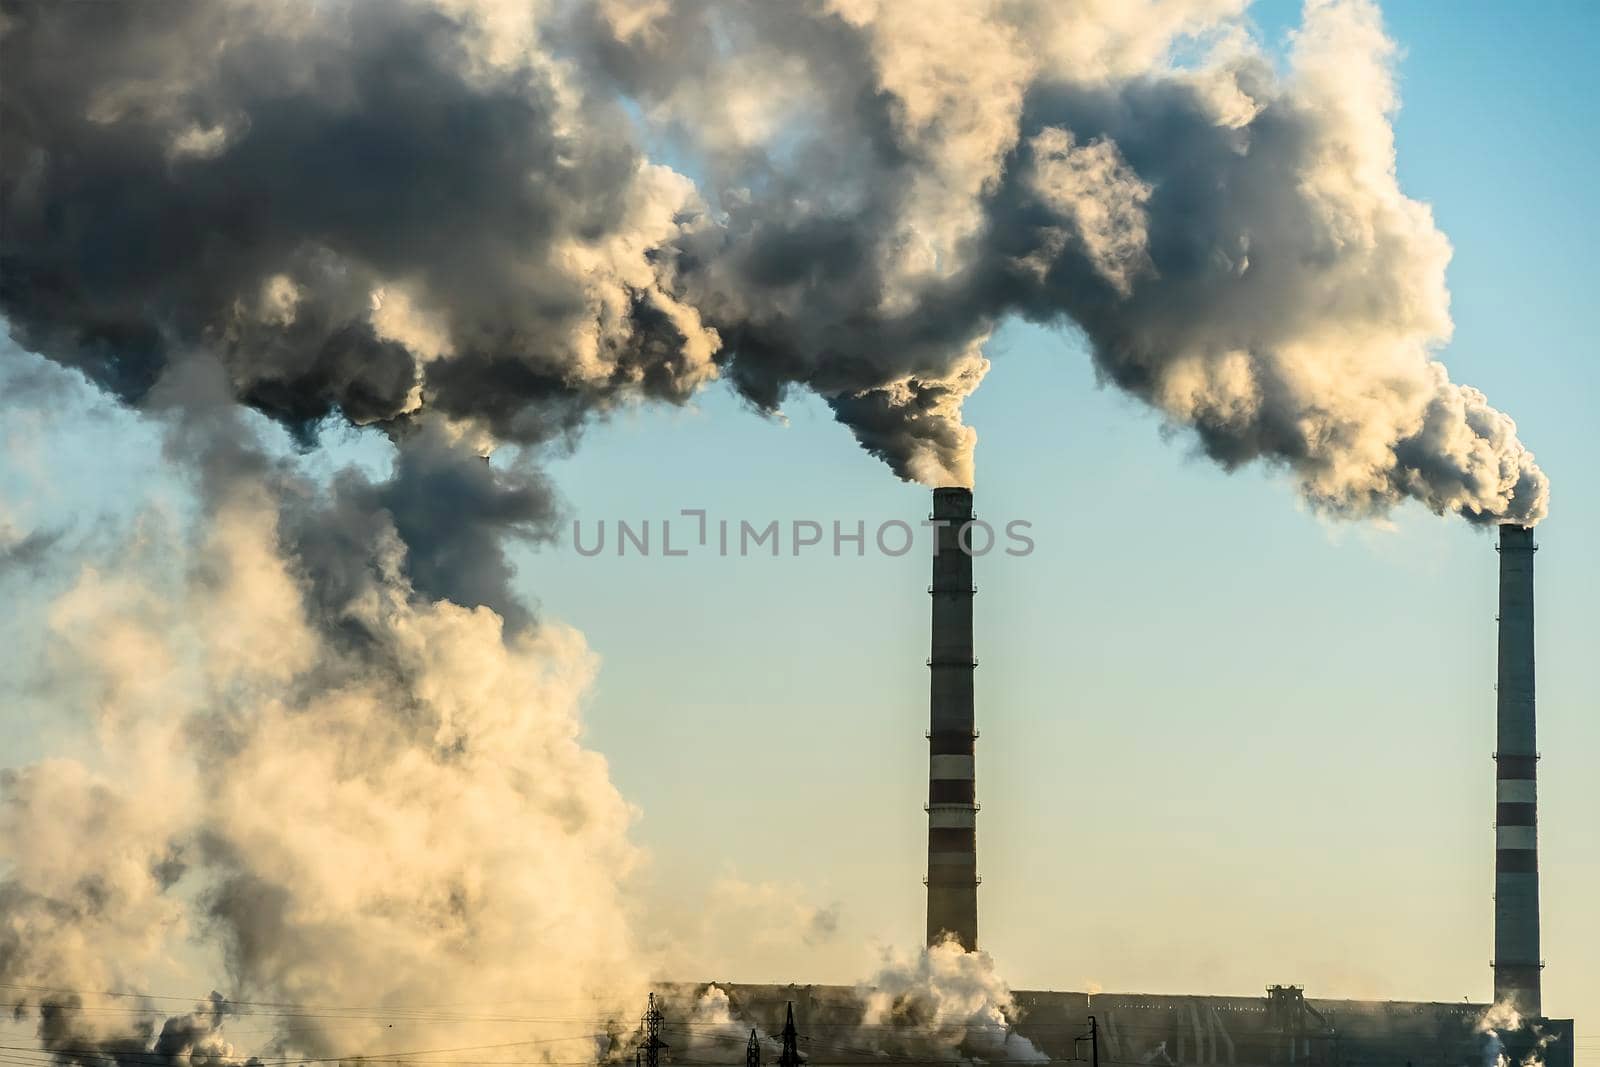 Smoking factory chimneys with co2 emissions.Environmental problem of environmental and air pollution.Climate change,ecology, global warming.The sky is smoky with toxic substances.Soot from factories